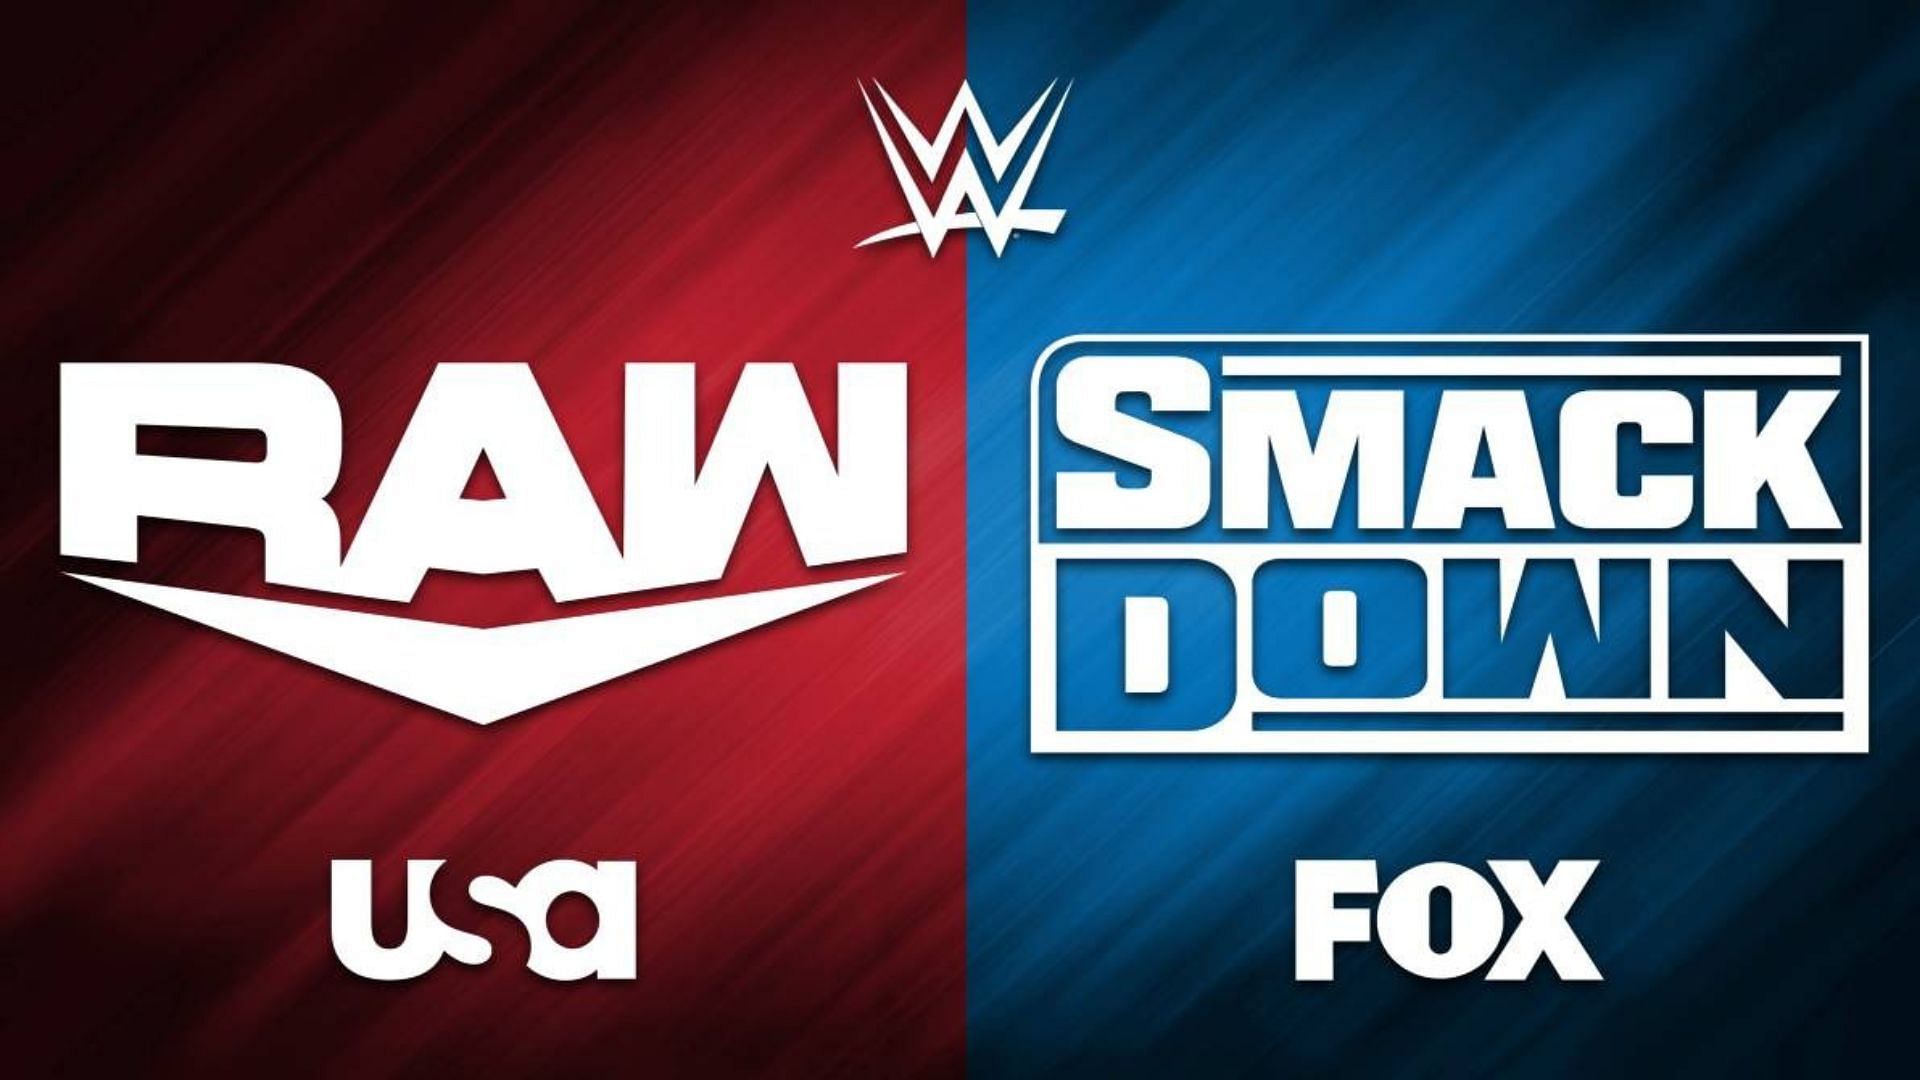 WWE RAW and SmackDown are headed for WrestleMania 39!